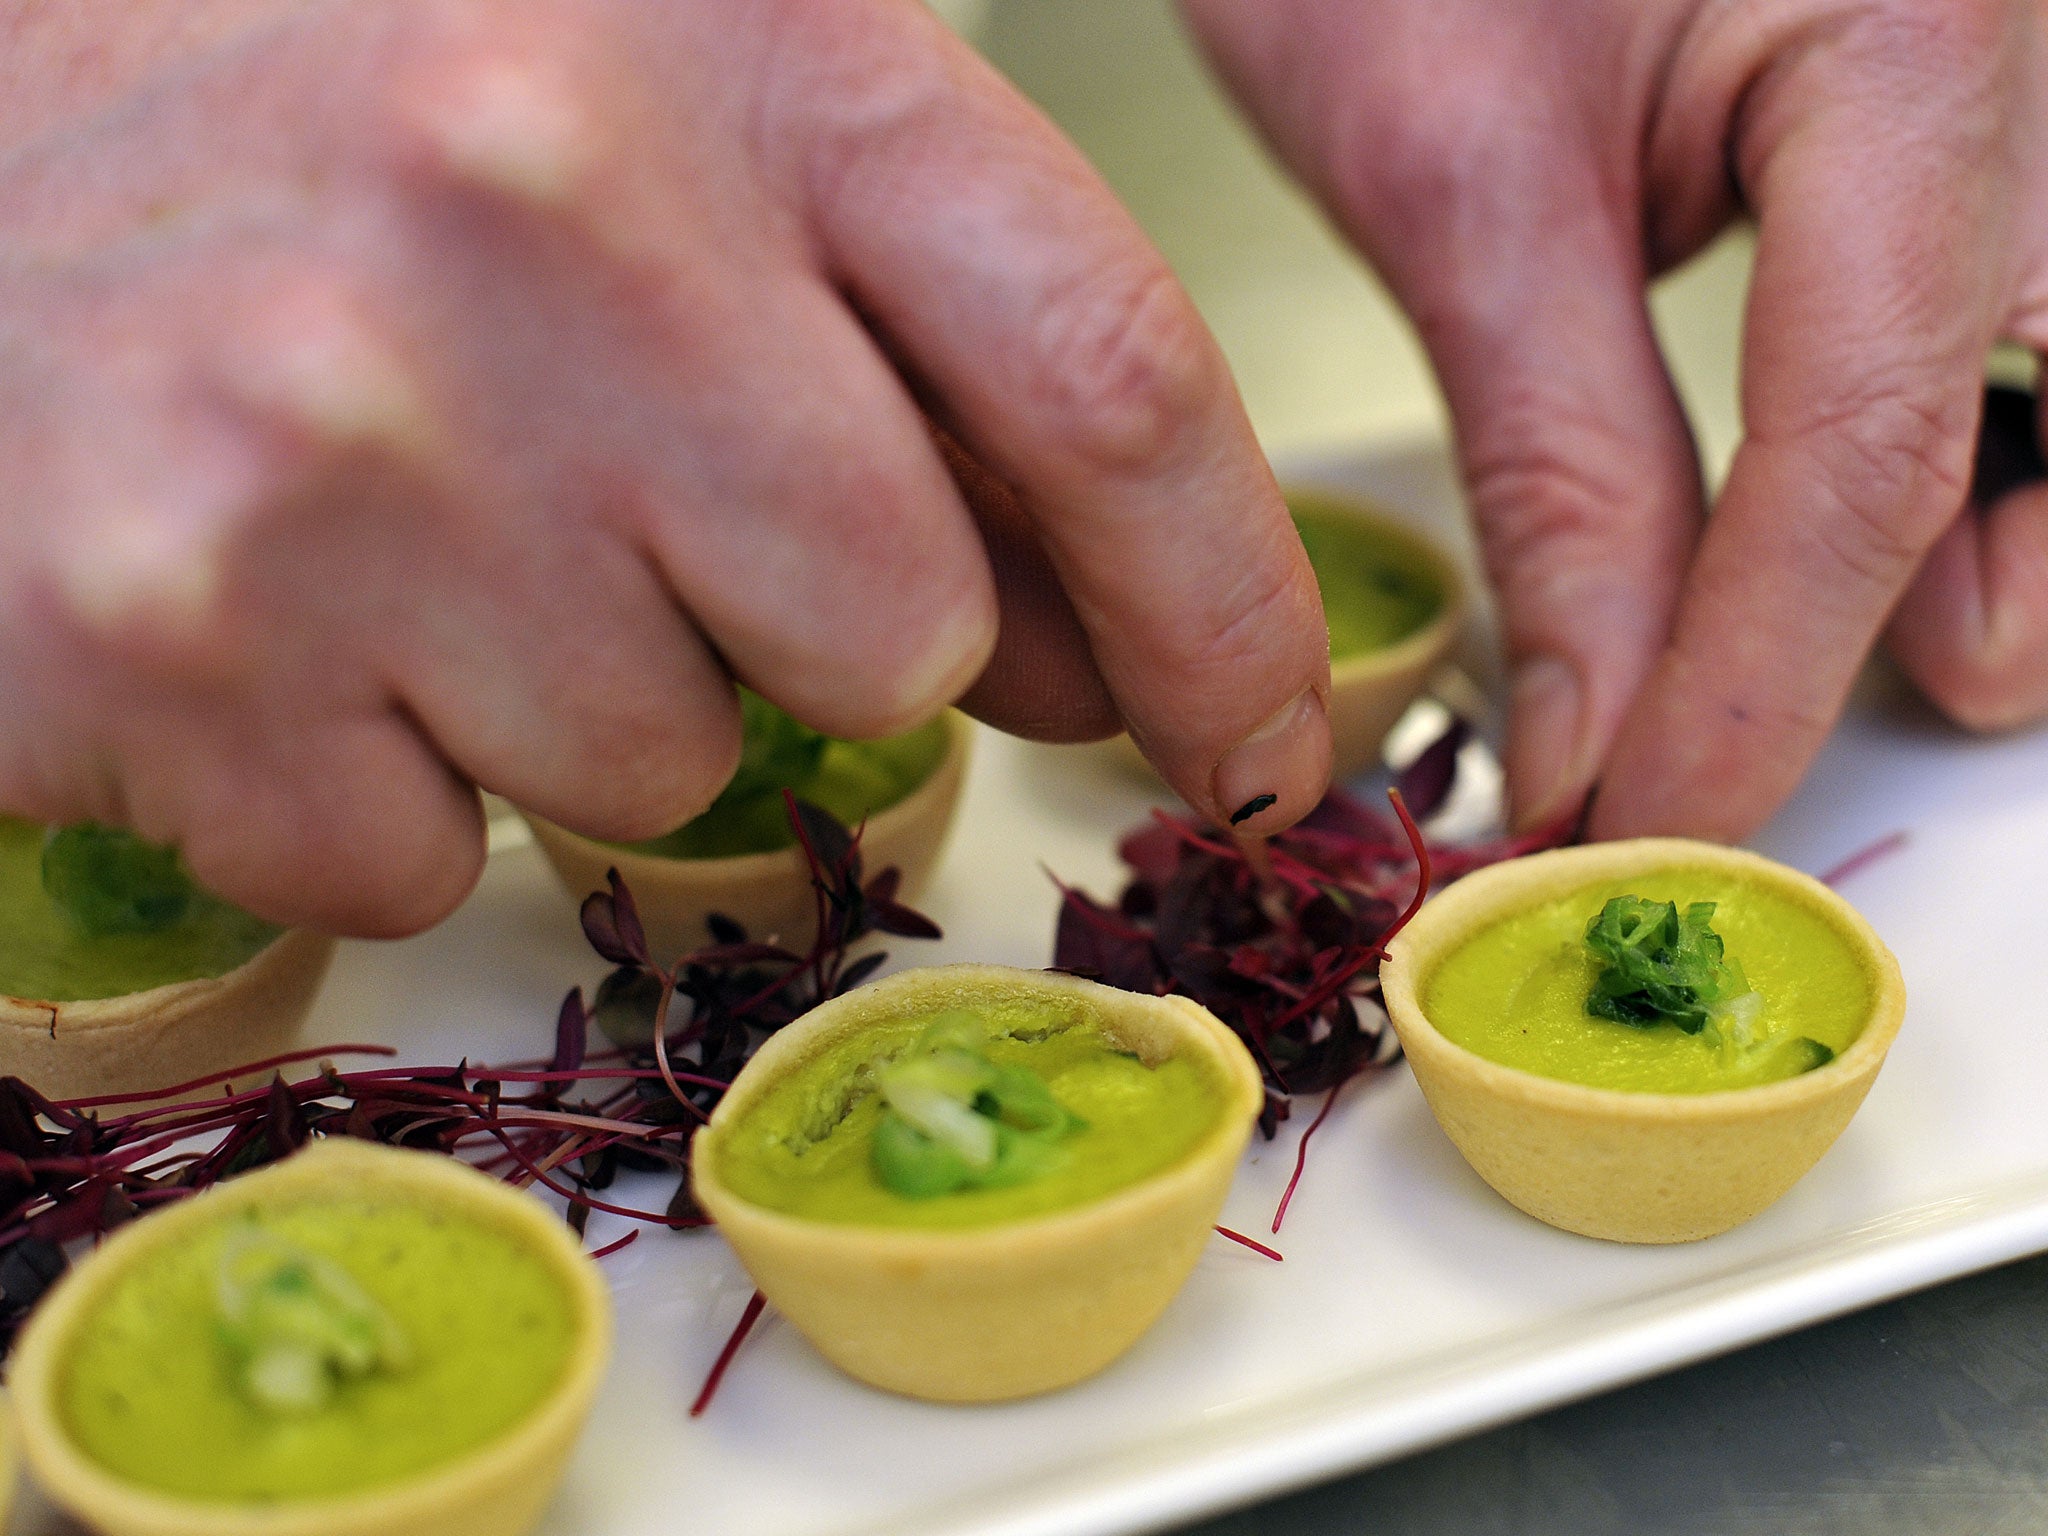 A royal chef adds the finishing garnish to a platter of Wilted Spring Onion and Water Cress quiche canapes, on March 25, 2011 in London, England